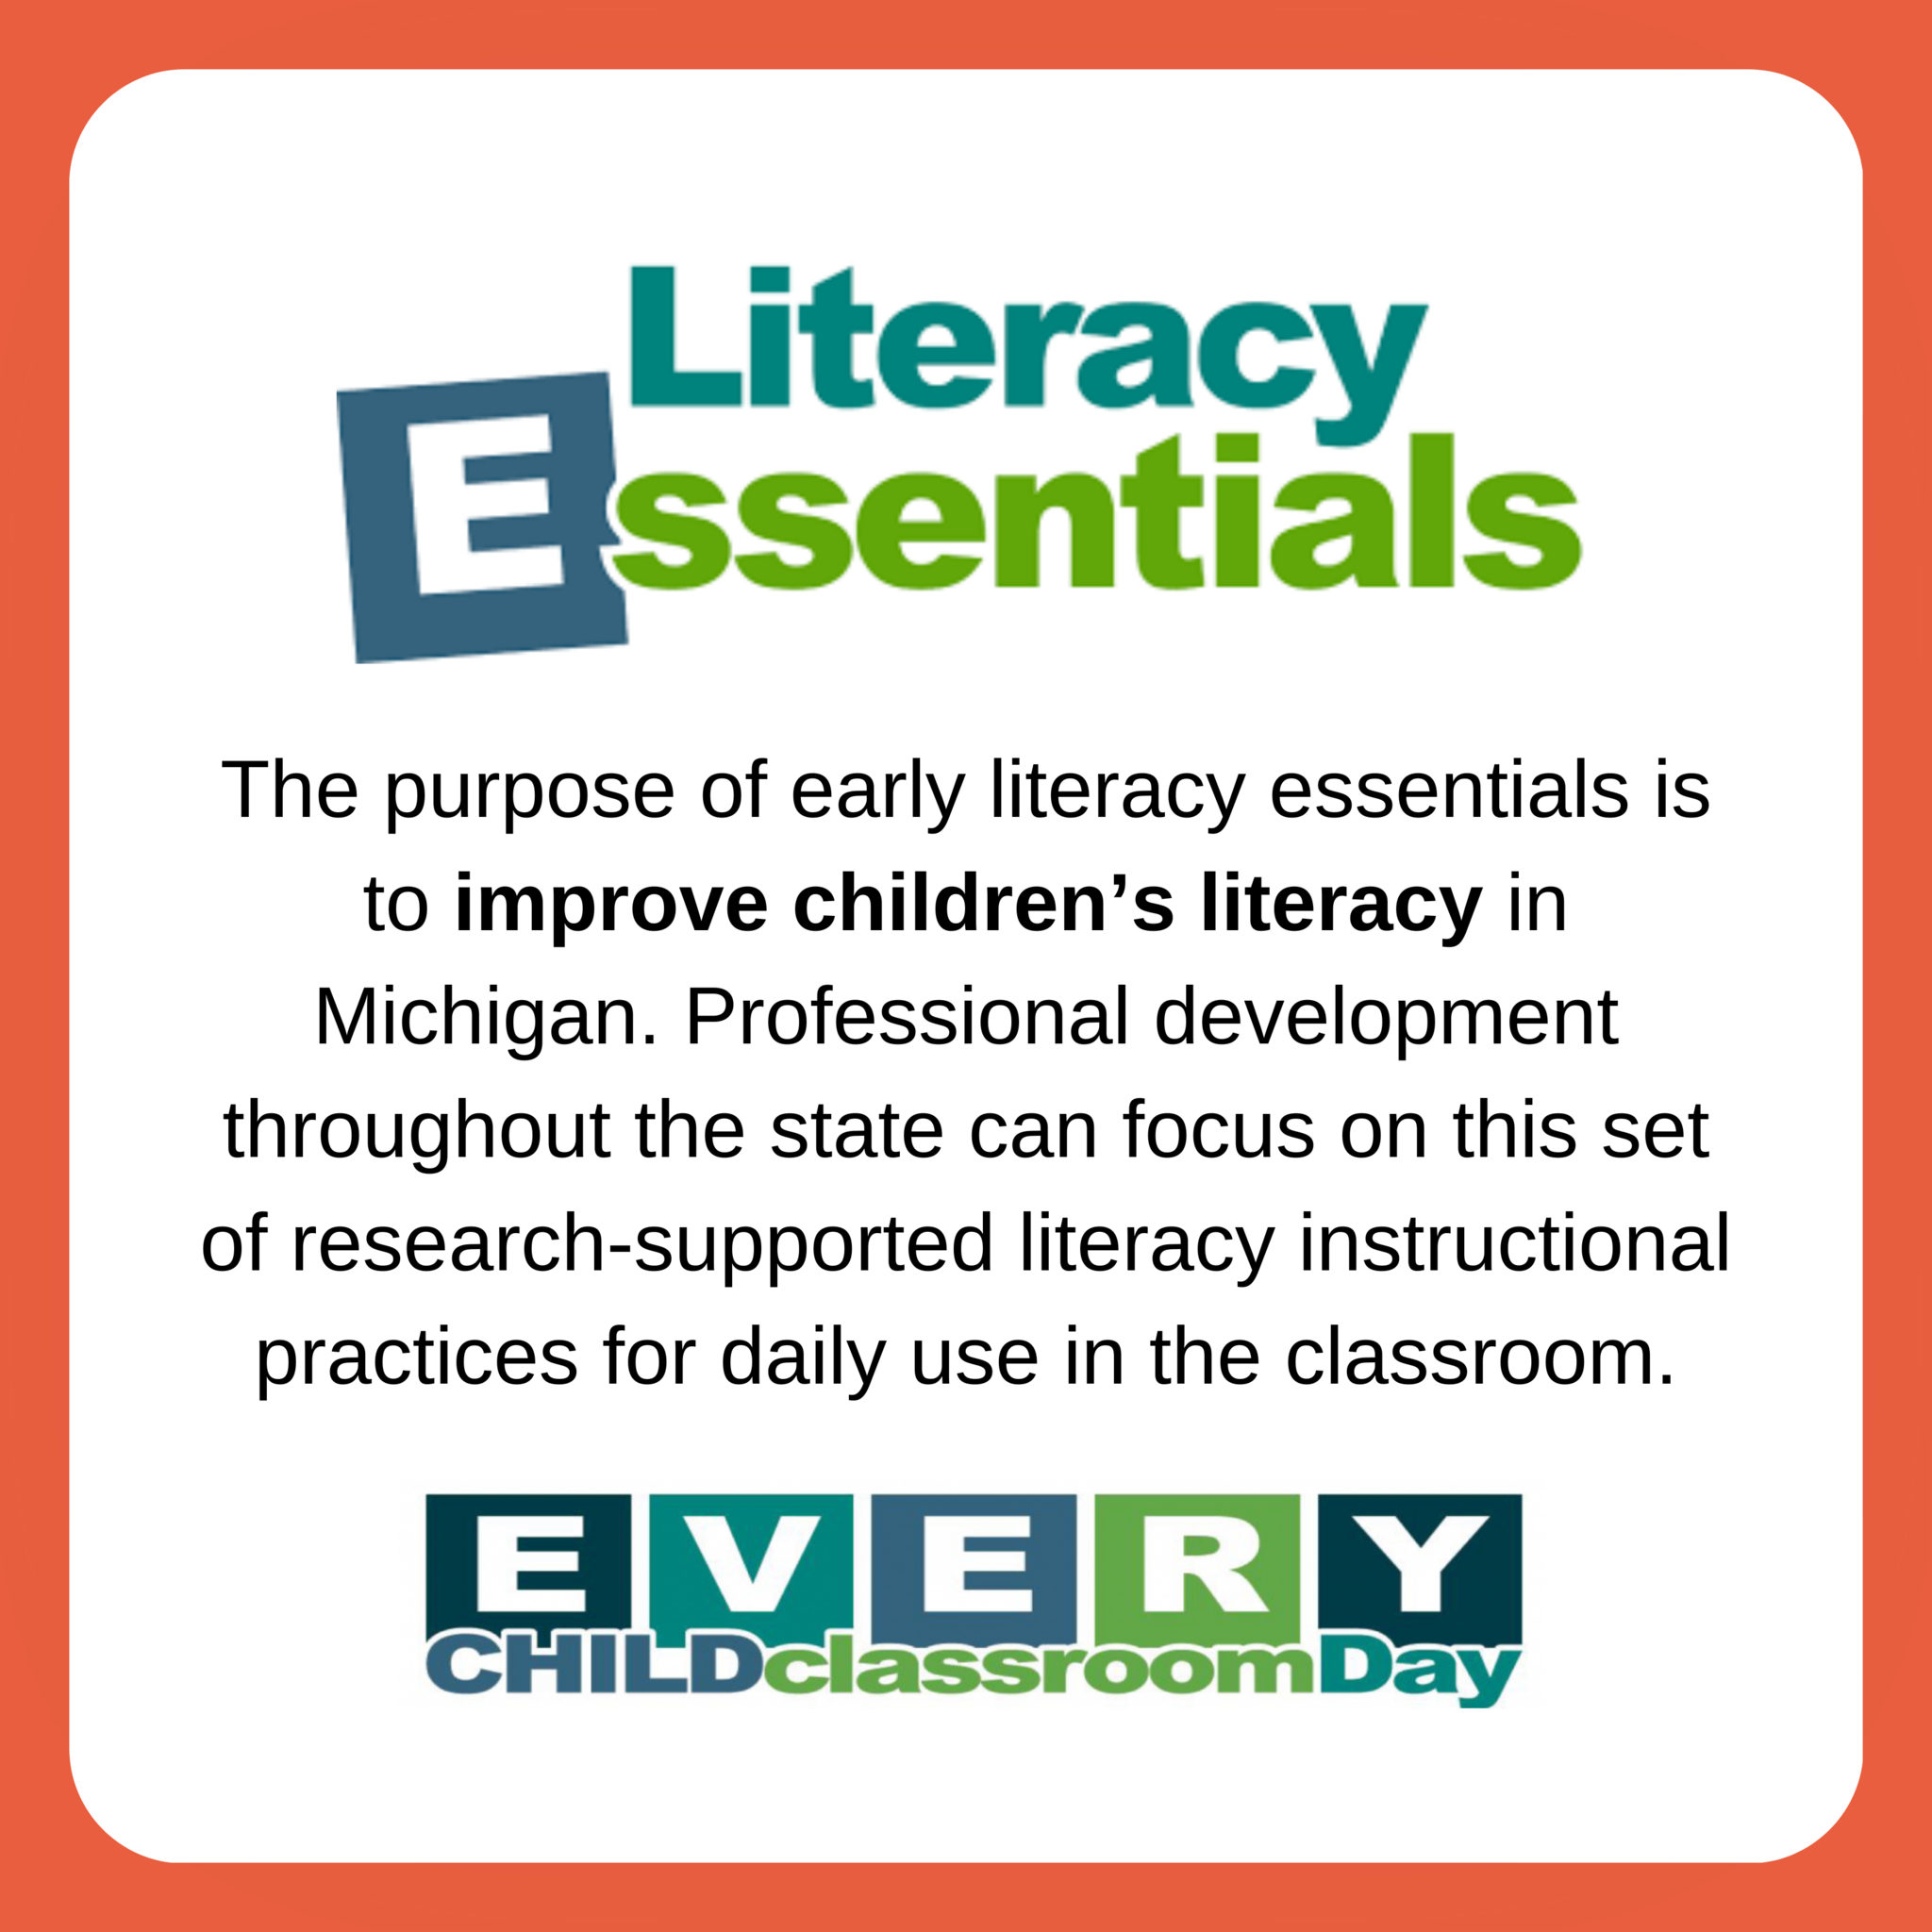 Literacy Essentials. The purpose of early literacy essentials is to improve children's literacy in Michigan. Professional development throughout the state can focus on this set of research-supported literacy instructional practices for daily use in the classrom. Every CHILD classrom DAY